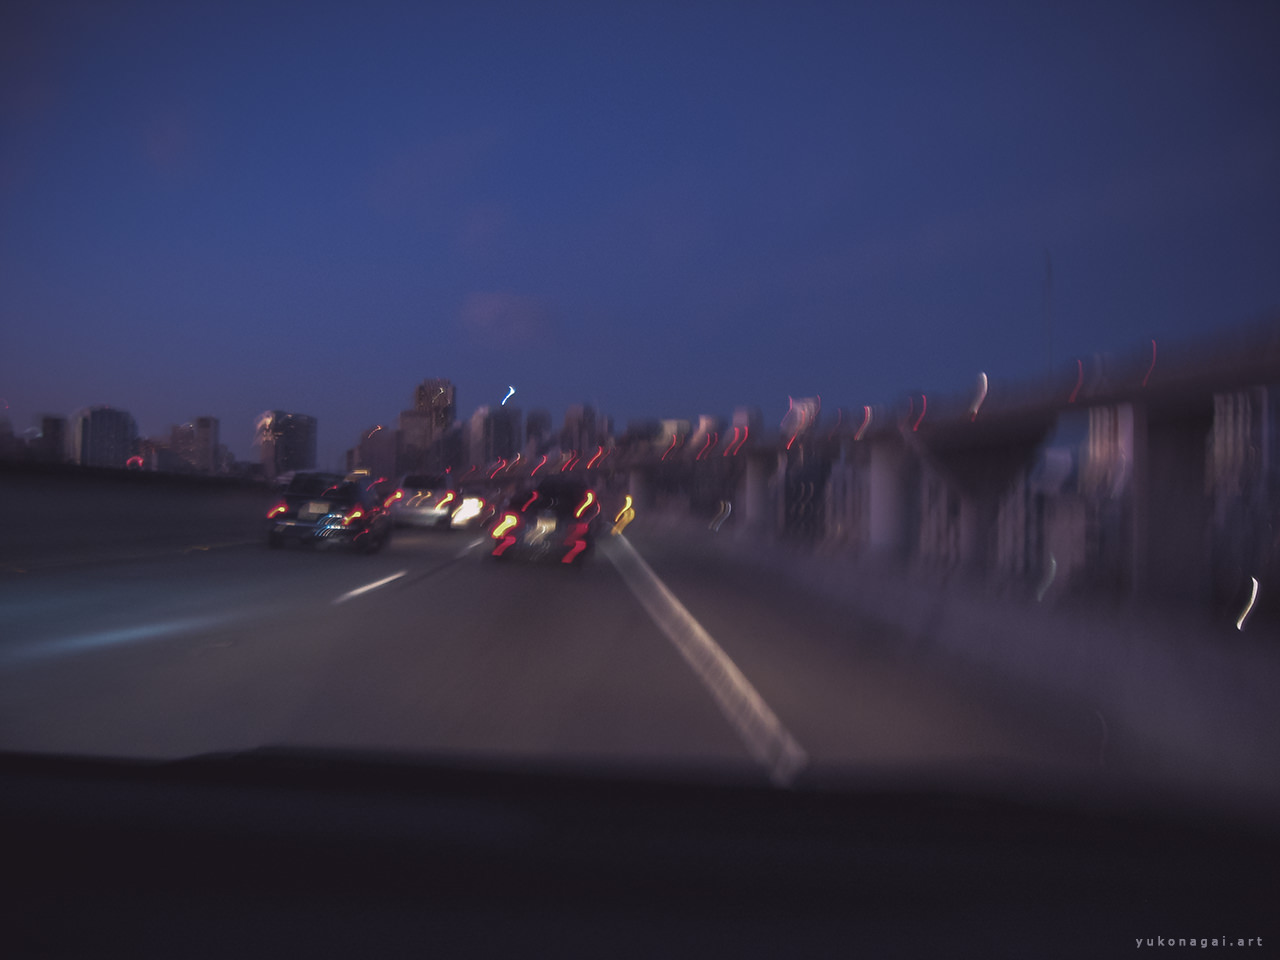 Distant city scape and freeway traffic lights in blur.